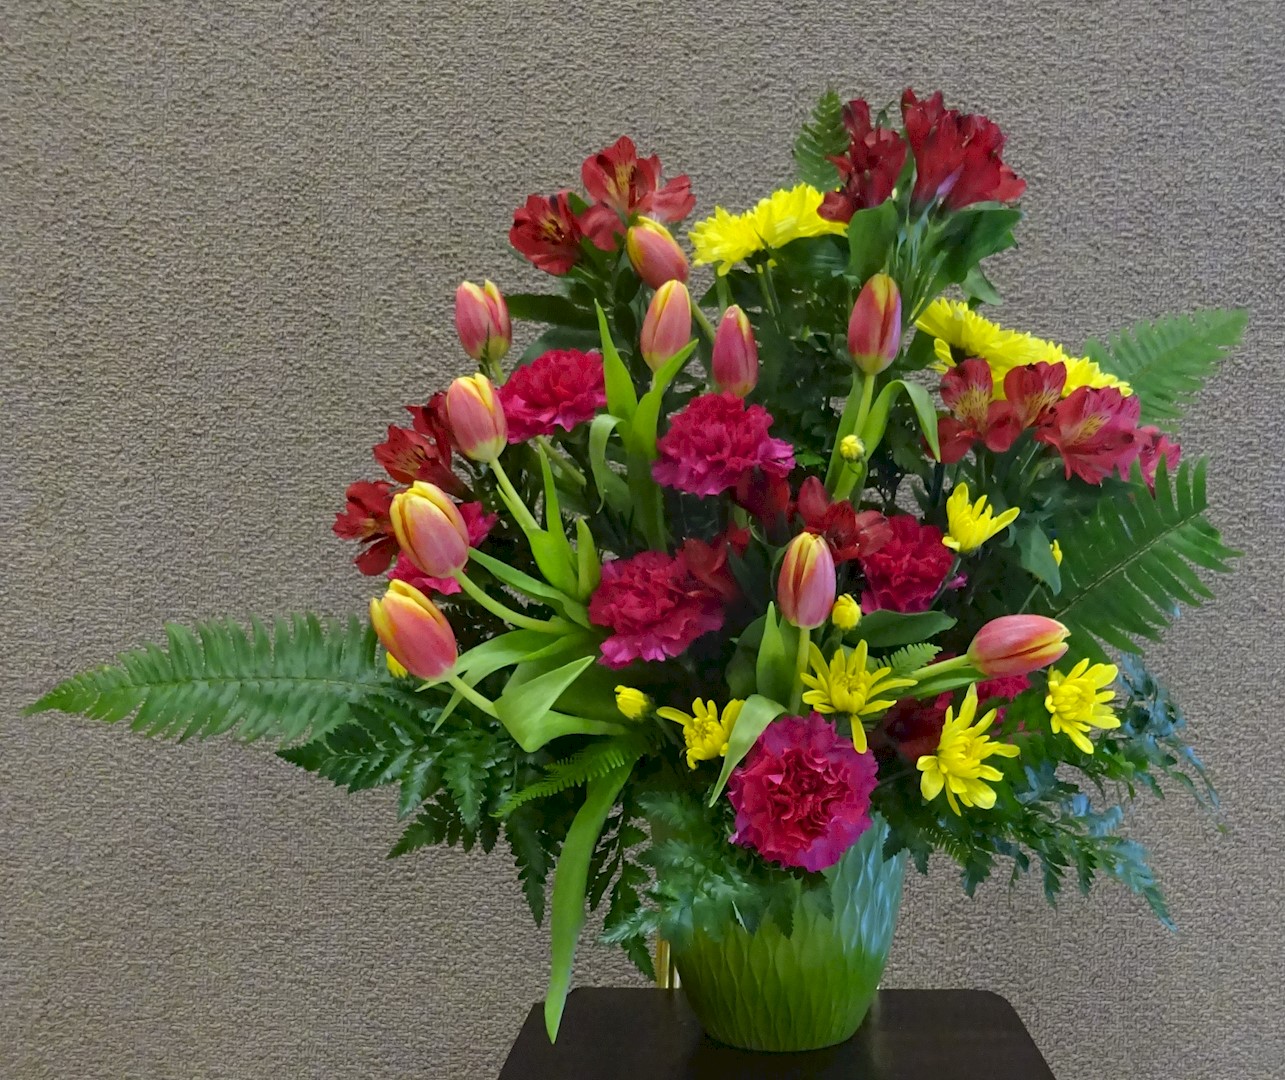 Flowers from Your church family at Evangelical Free Church